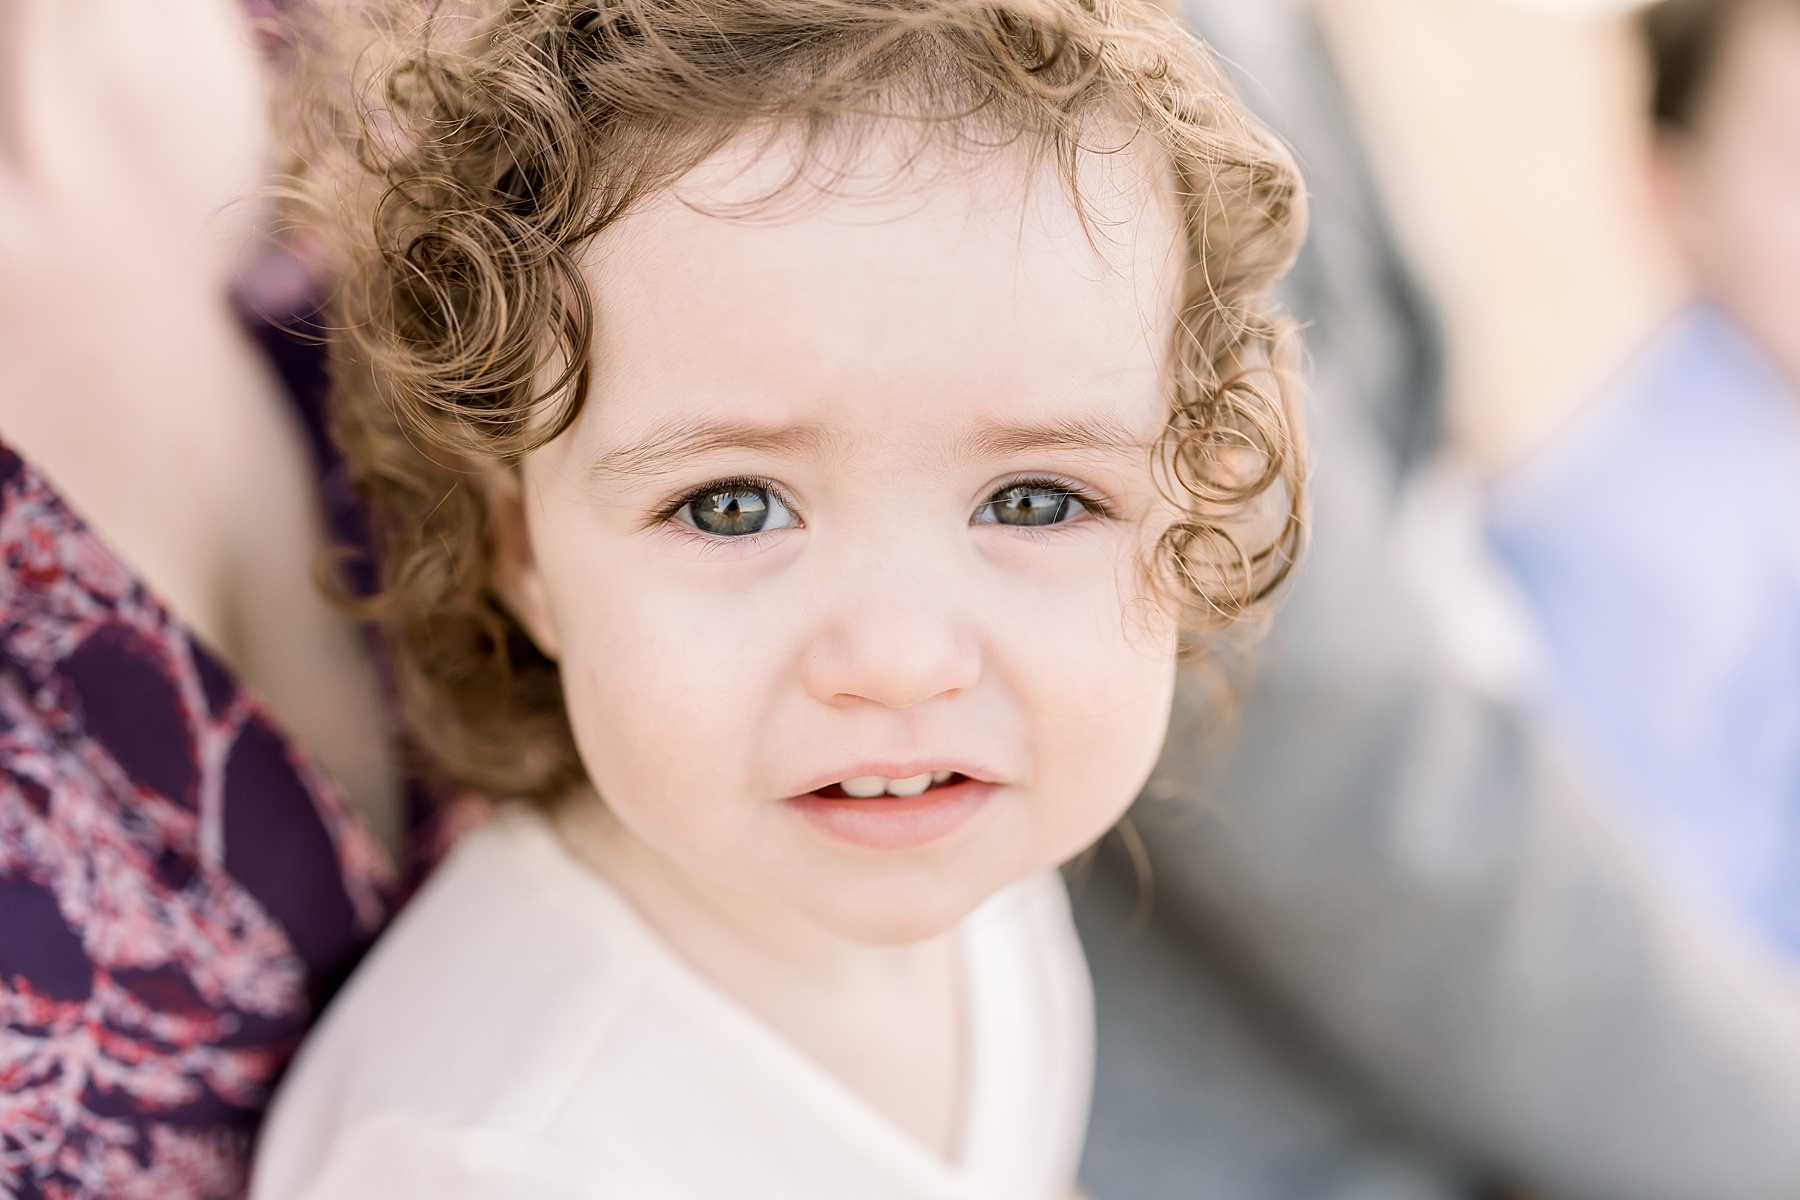 little girl looking directly at the camera in cream dress with curly brown hair